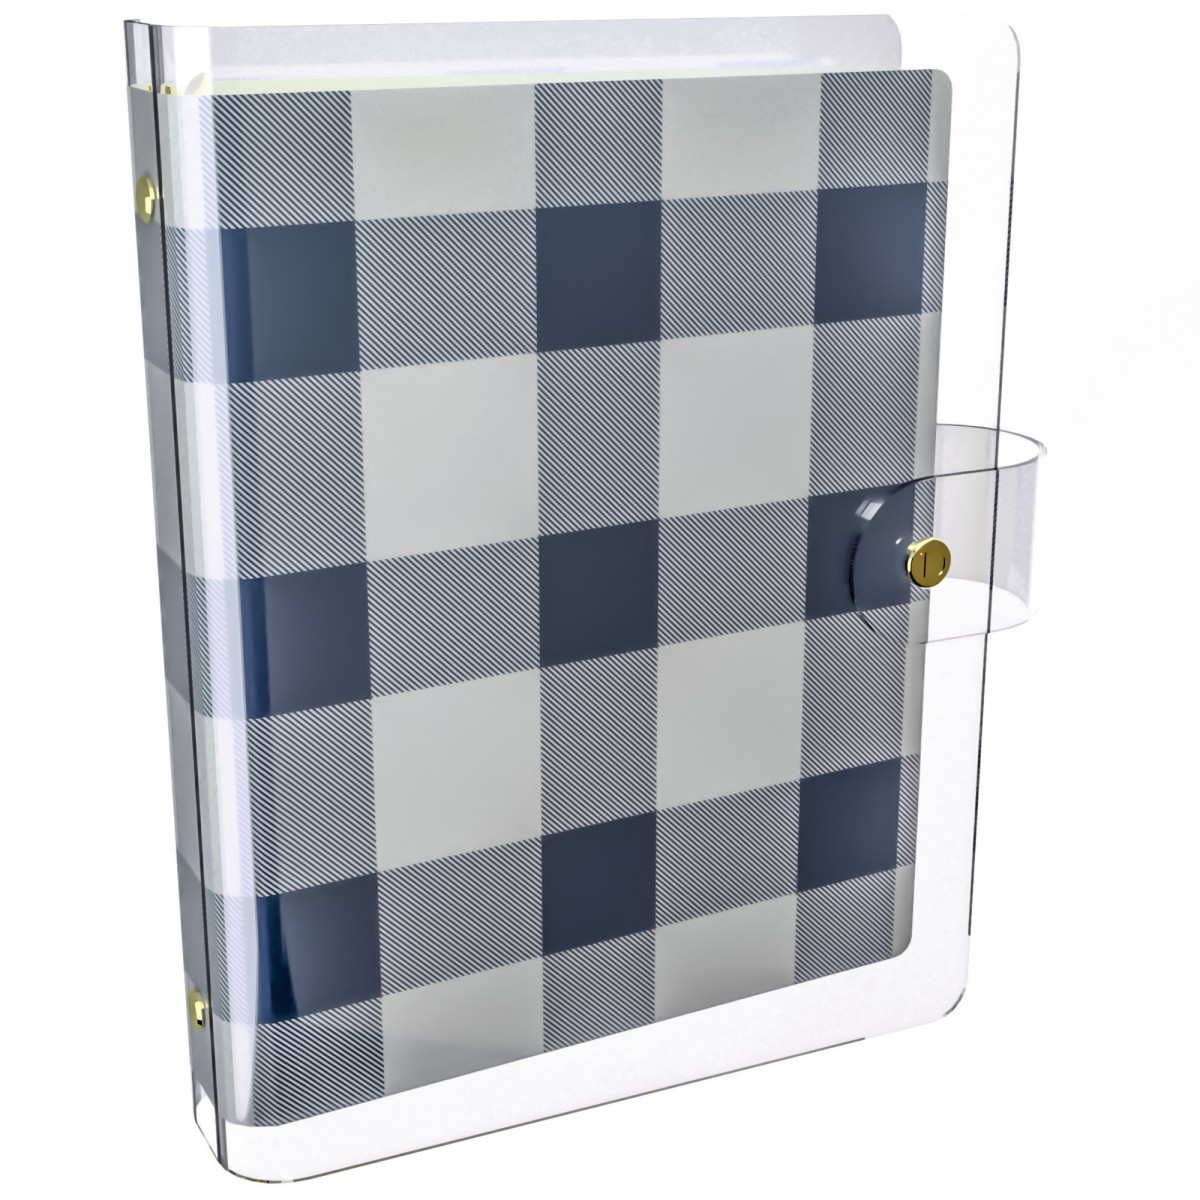 DISCAGENDA CLARITY CLEAR PVC PLANNER COVER - NAVY CHECKERED, RINGBOUND, A5 SIZE